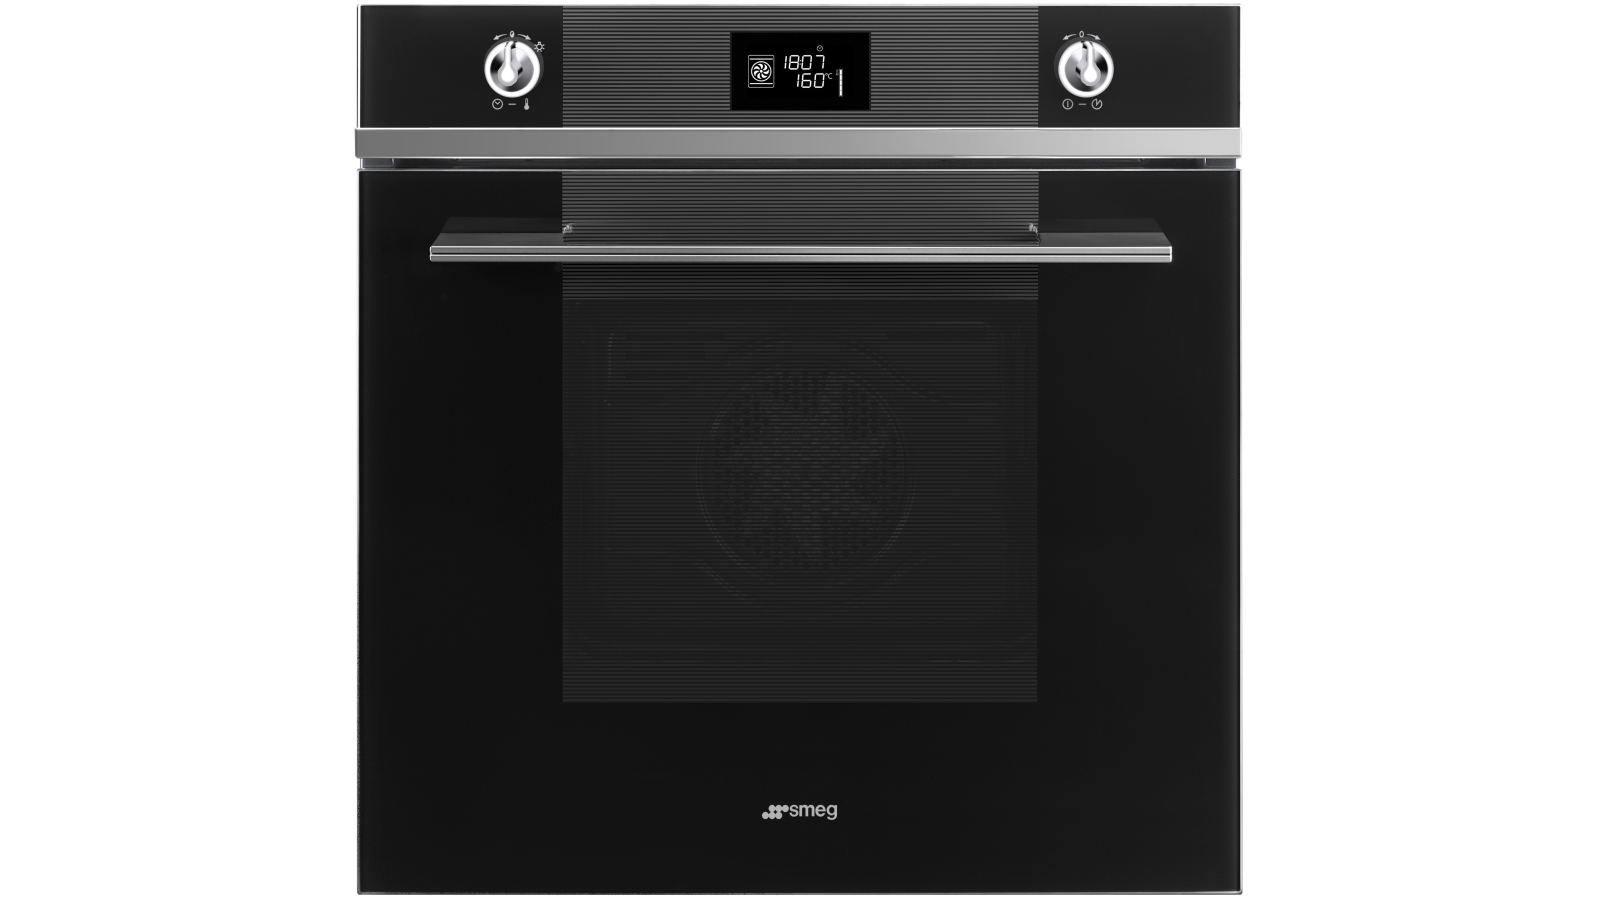 Smeg Linea 600mm Thermoseal Pyrolytic Oven - Black